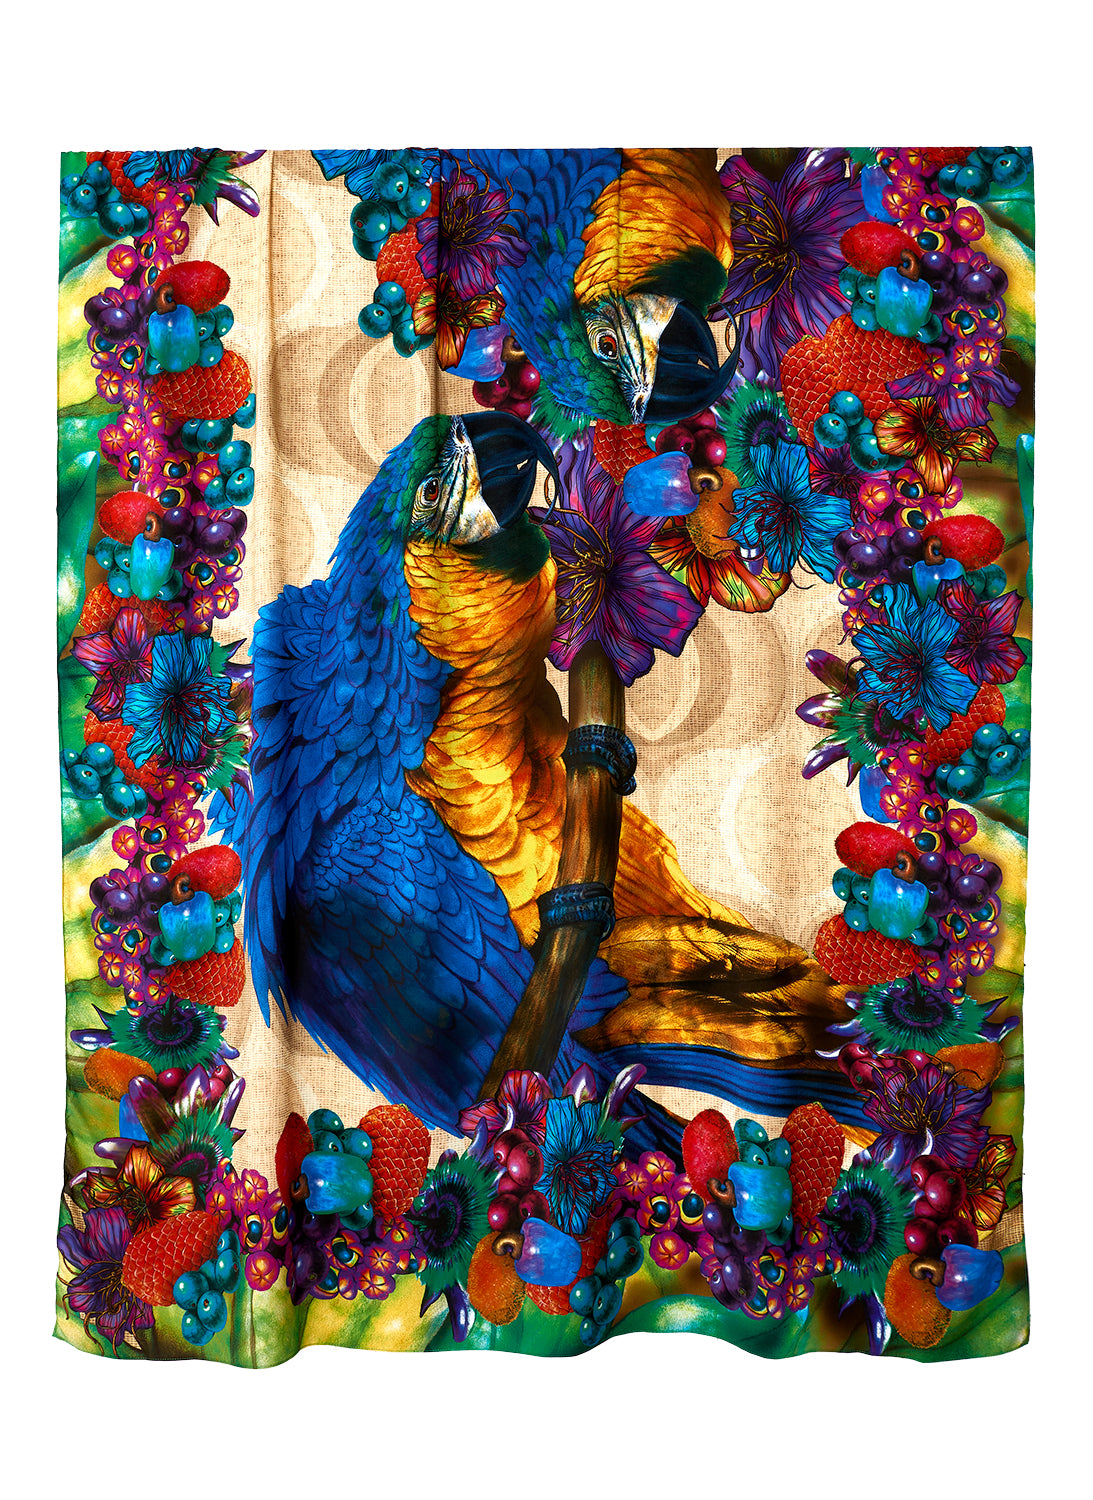 Panneau Blue Macaw in polyester georgette | 130x200cm